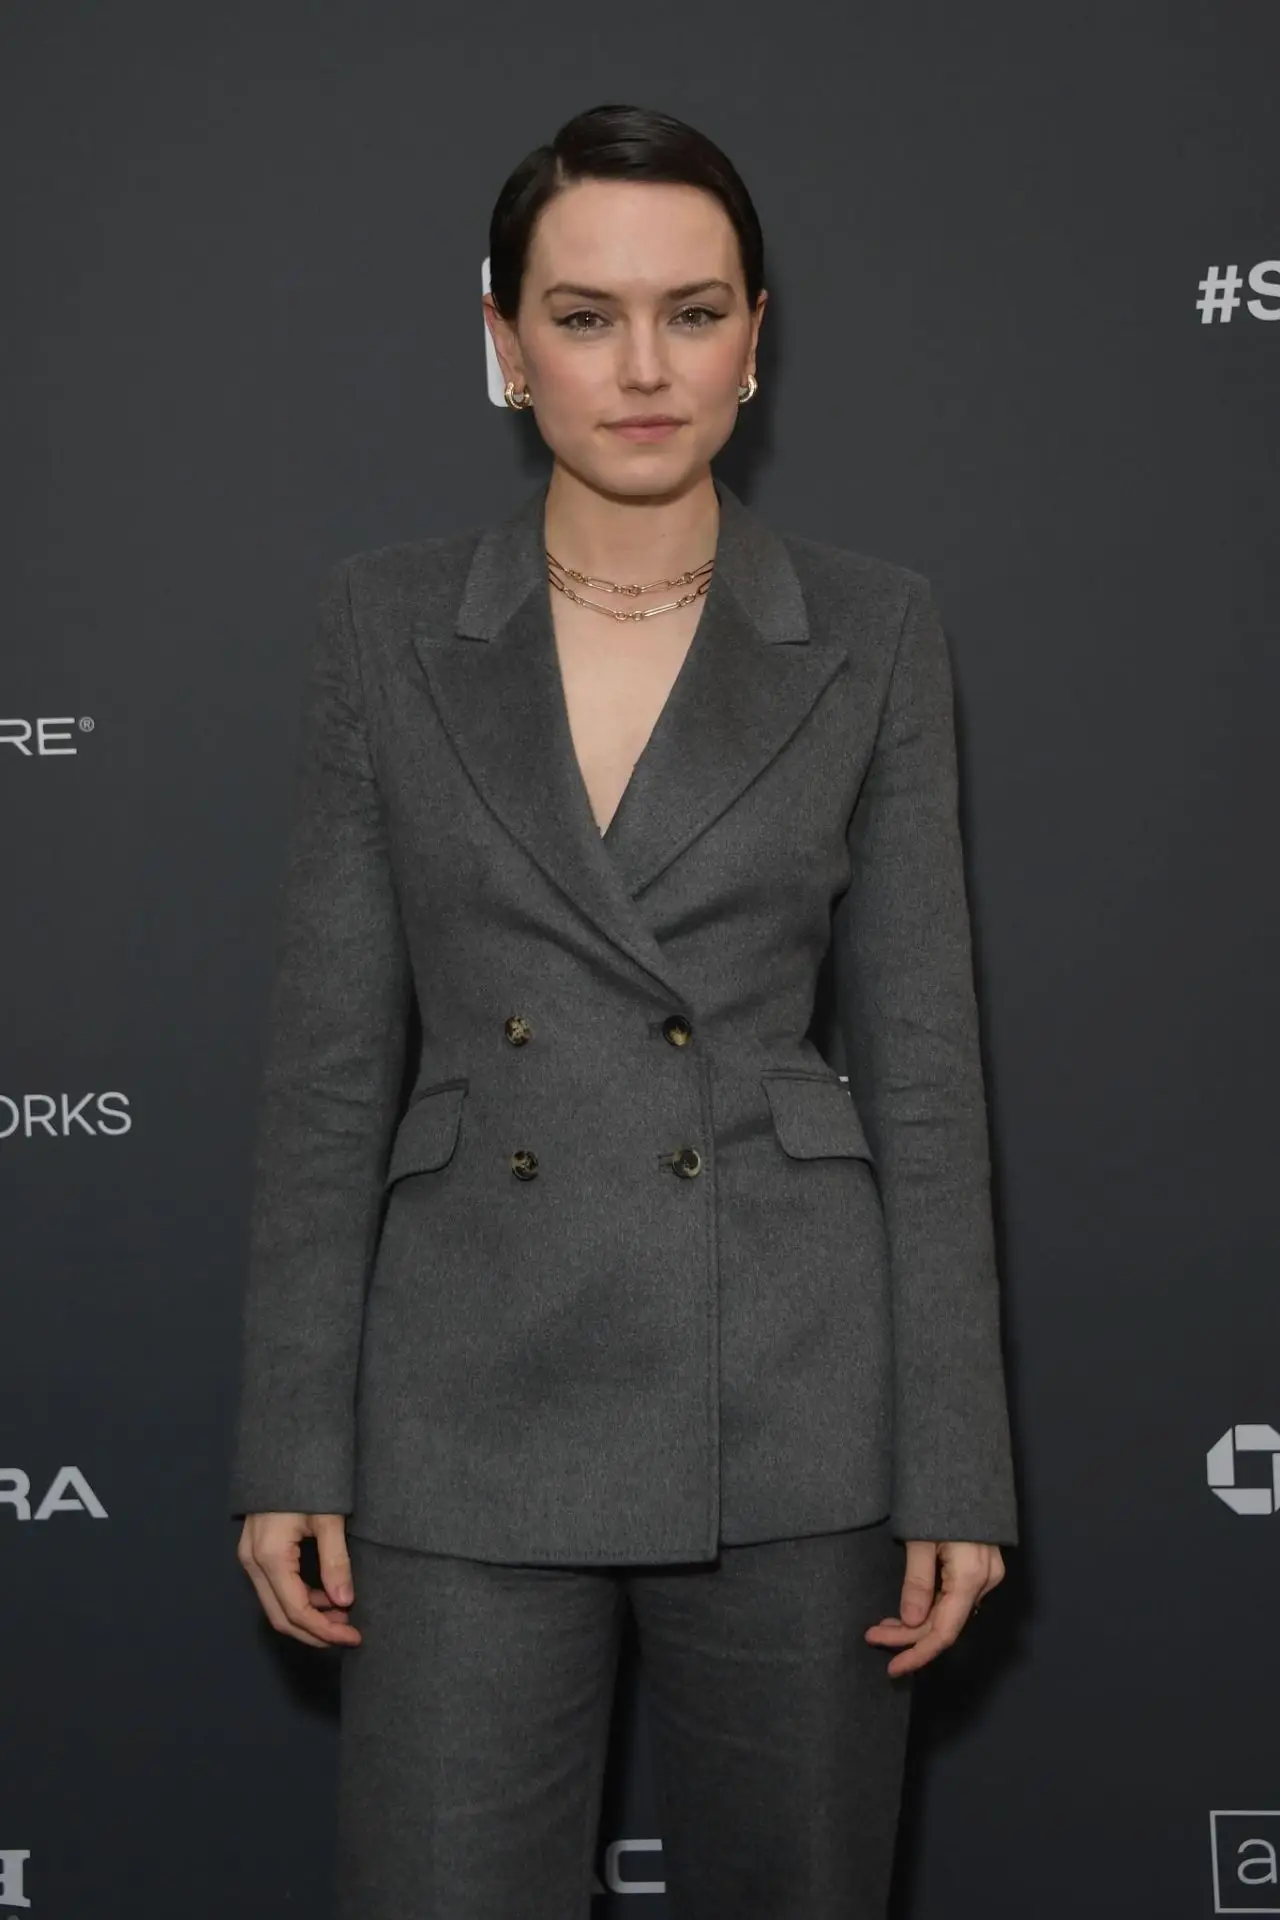 DAISY RIDLEY AT SOMETIMES I THINK ABOUT DYING PREMIERE AT SUNDANCE FILM FESTIVAL4